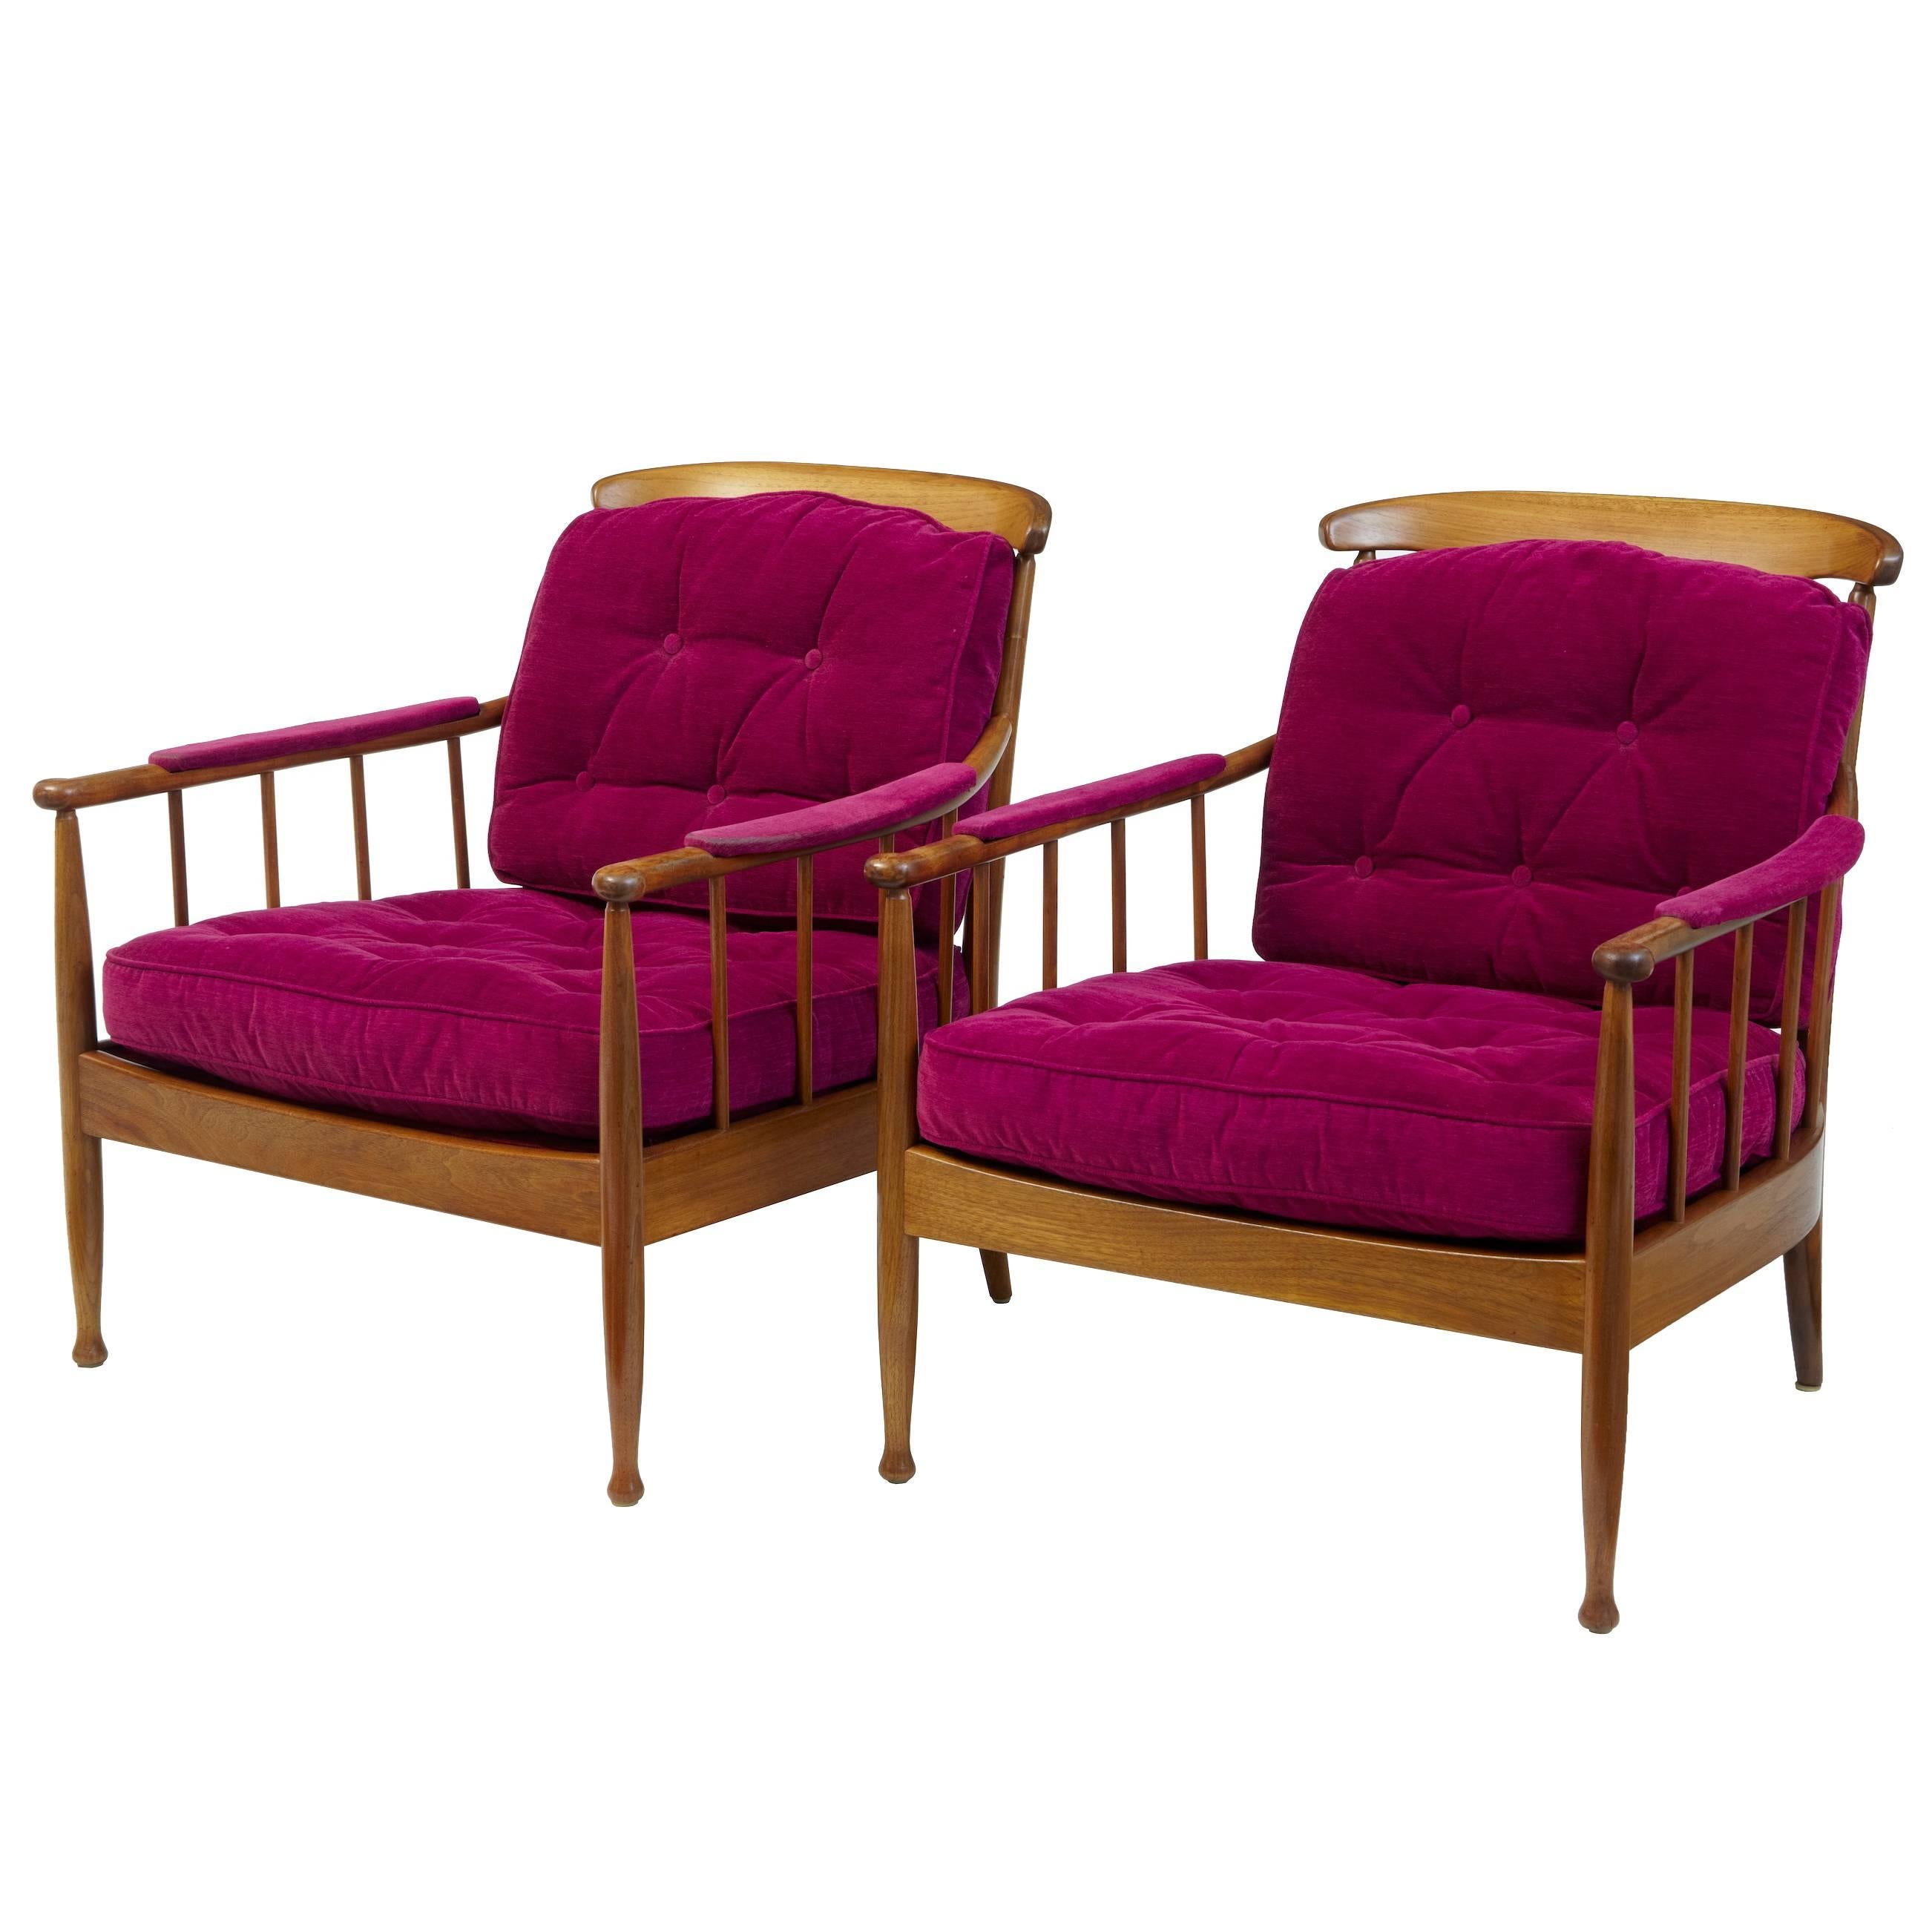 Pair of 1960s, Swedish Walnut Ope Mobler Lounge Chairs